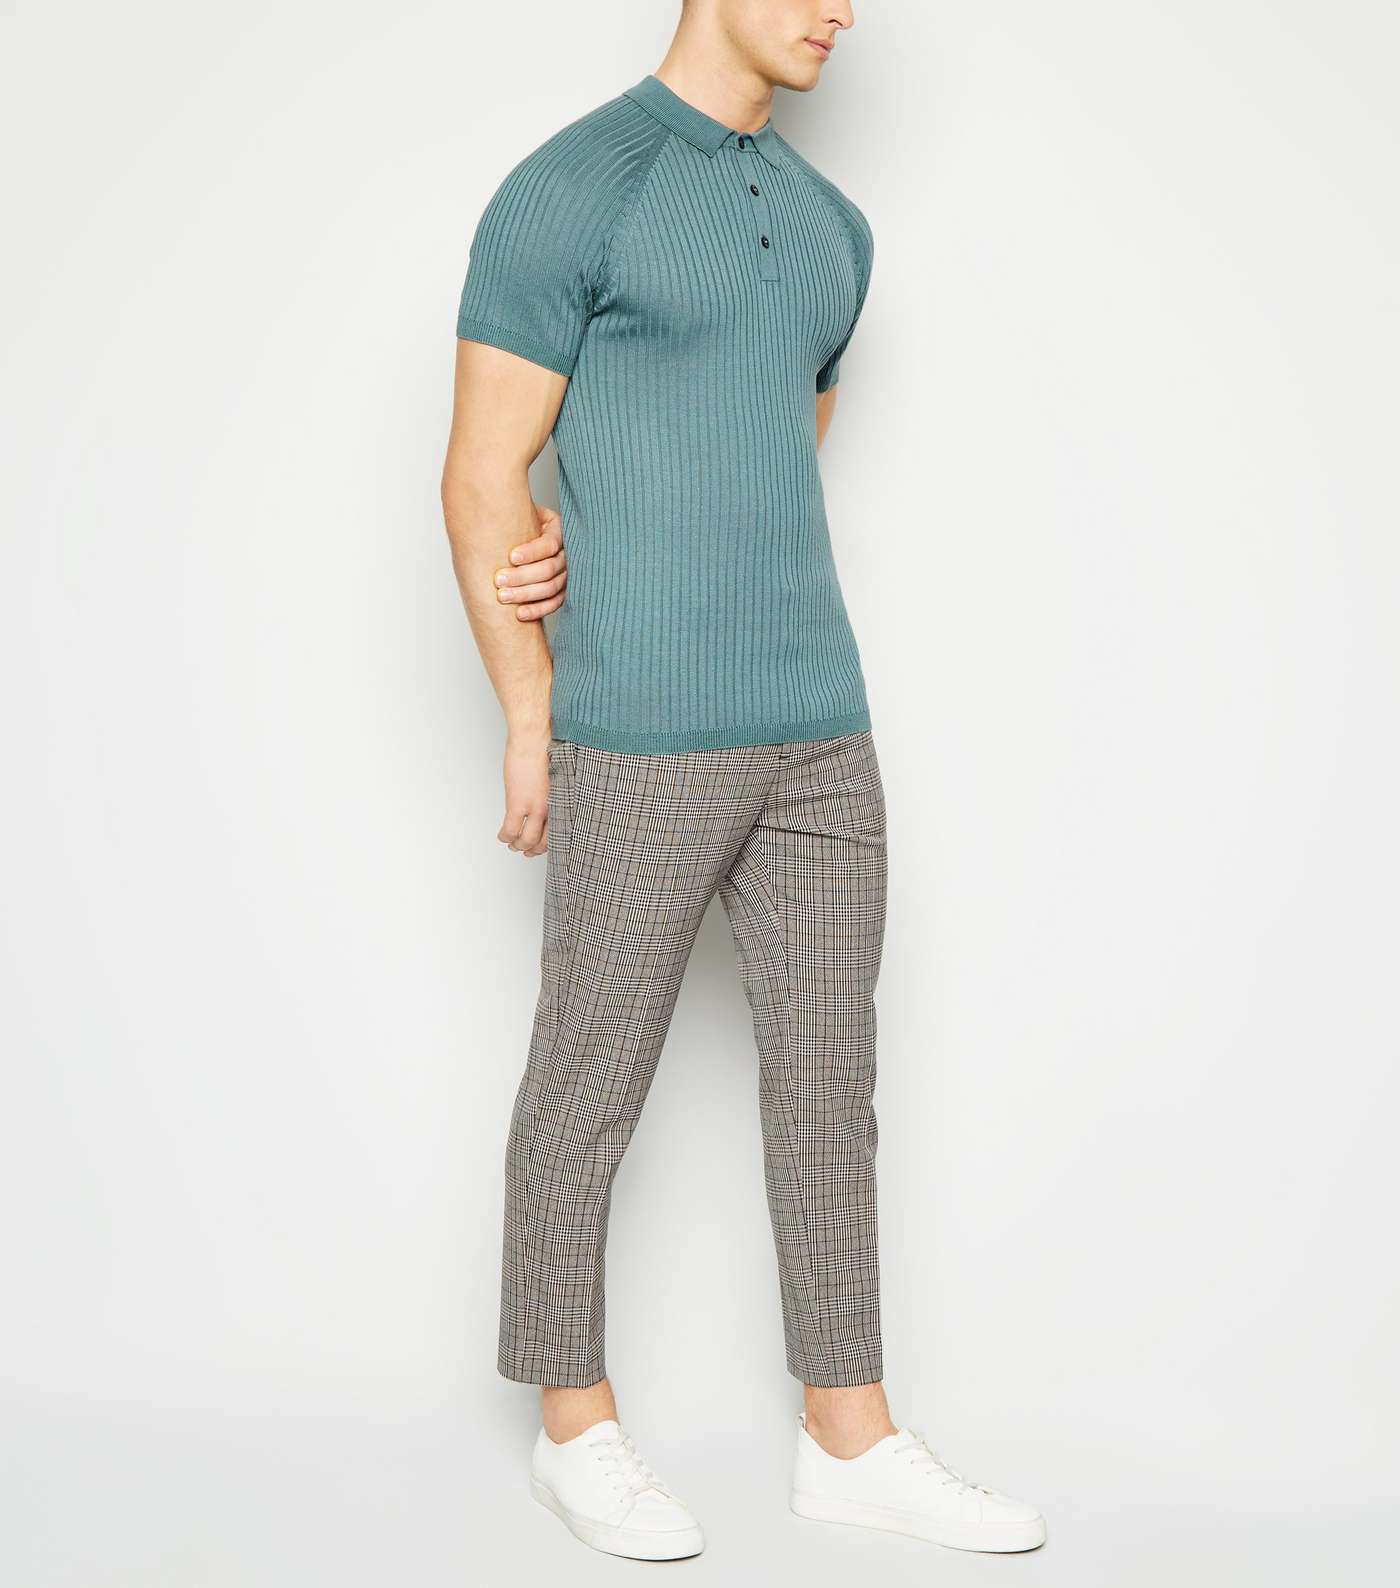 Teal Knit Muscle Fit Polo Shirt Image 2